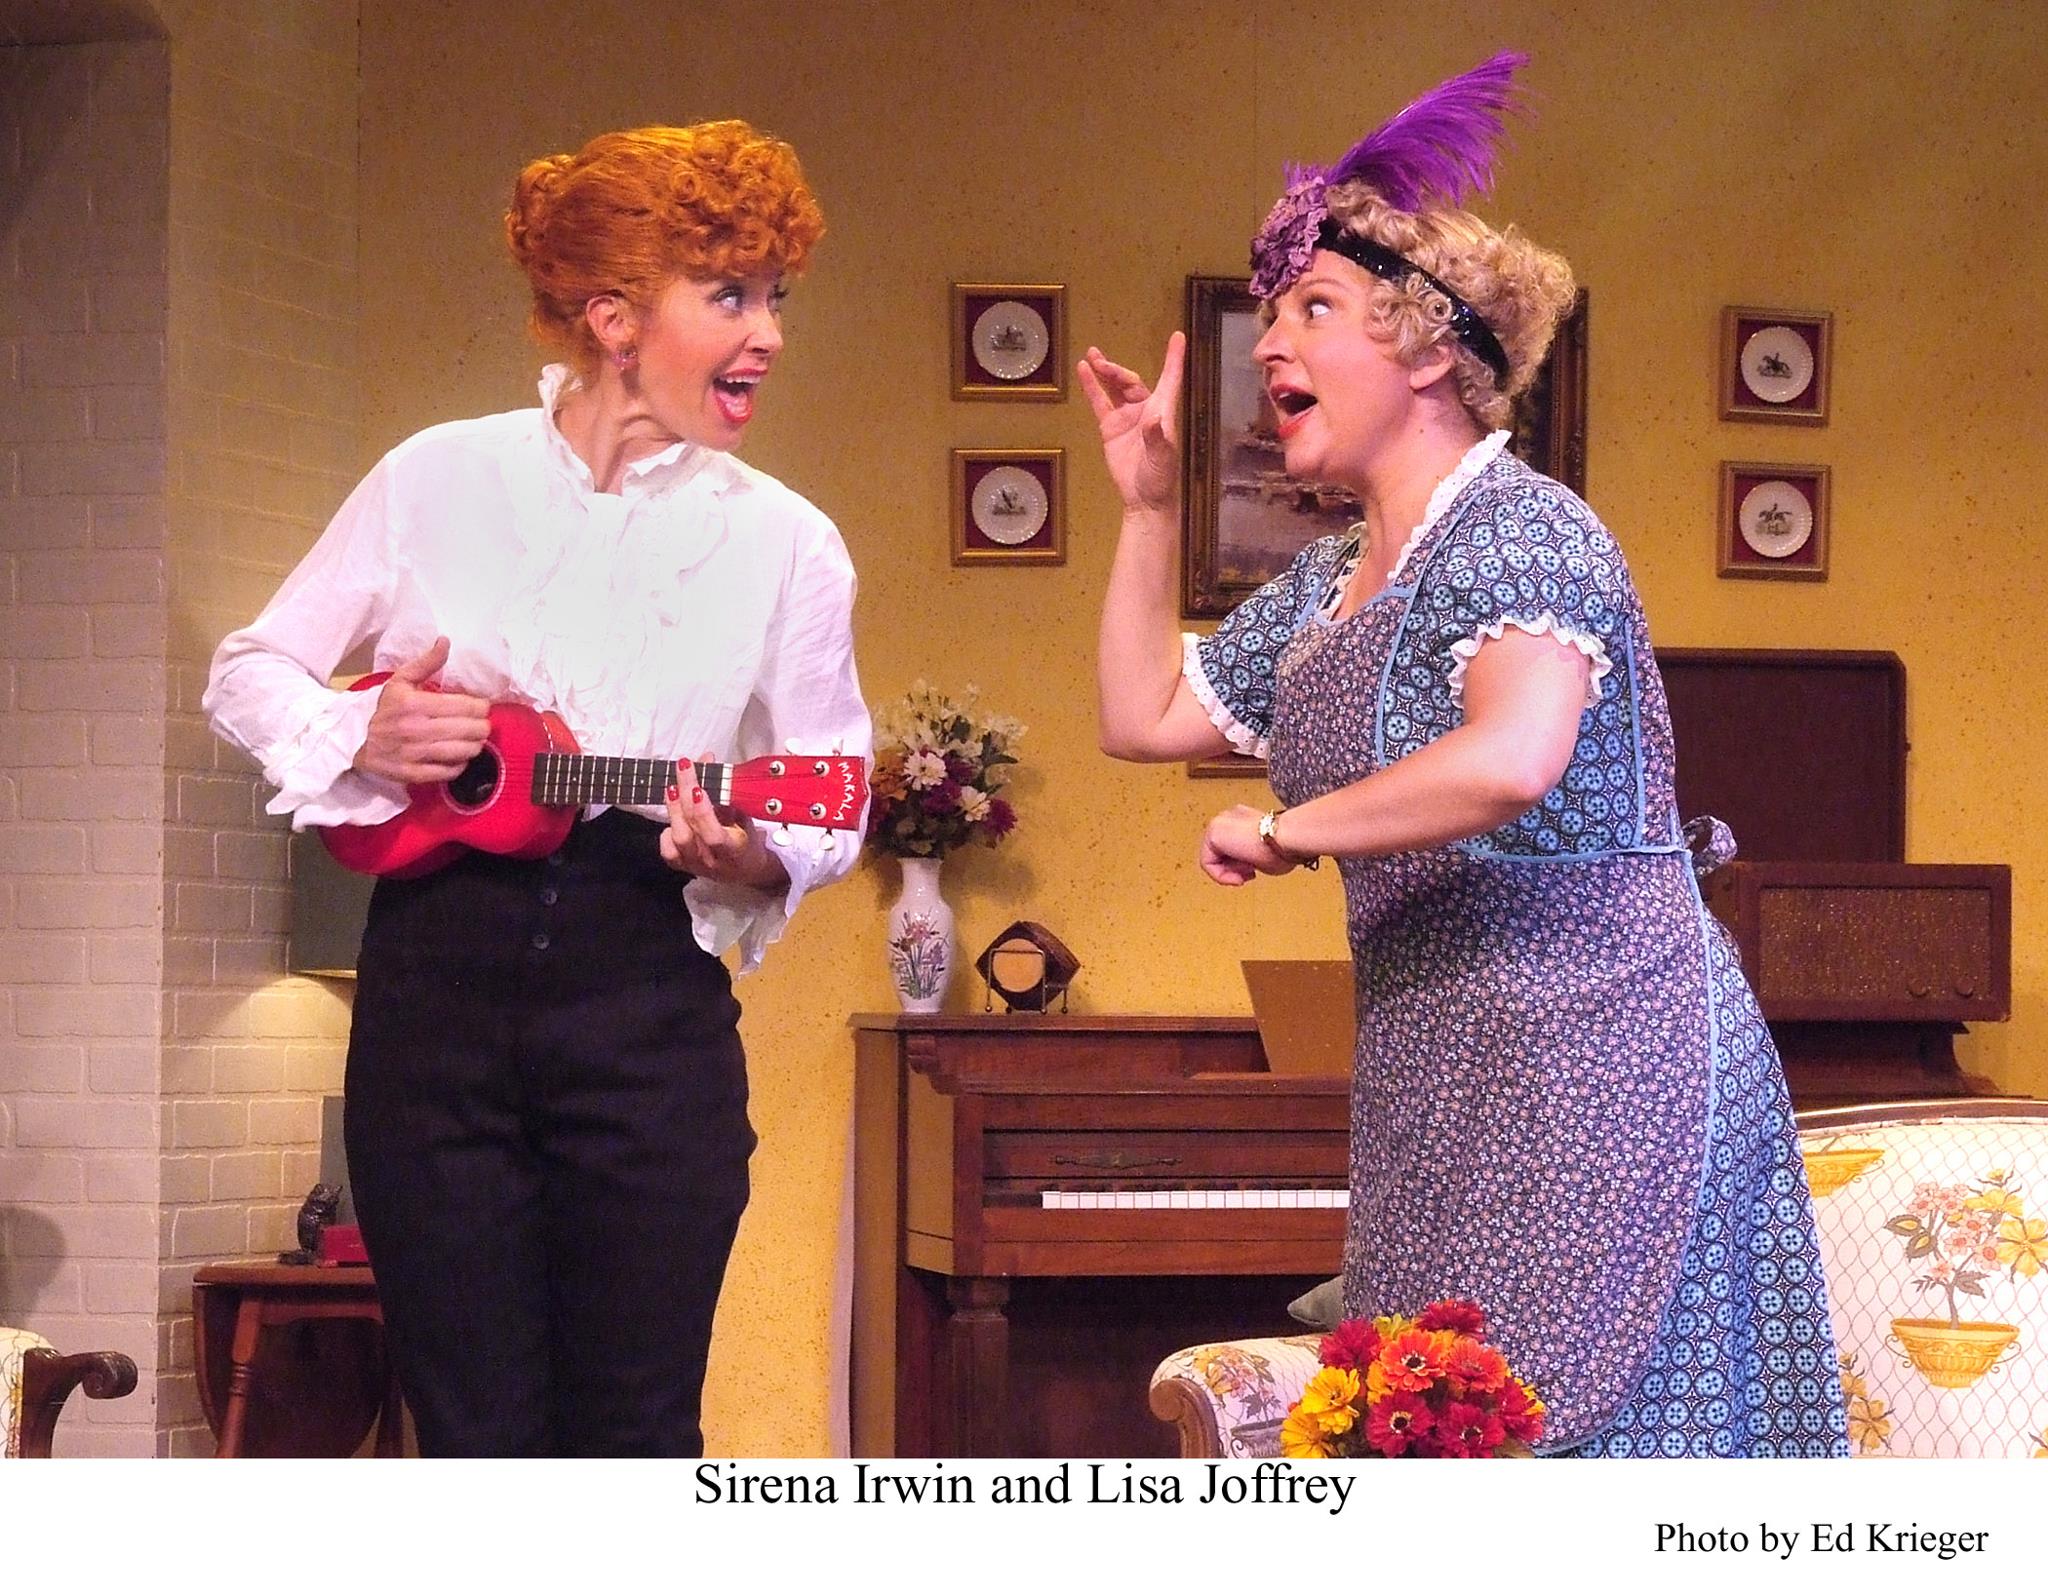 Still from I Love Lucy Live on Stage at Greenway Theatre in Los Angeles - Starring Original Los Angeles Cast Lisa Joffrey as Ethel Mertz and Sirena Irwin as Lucy.